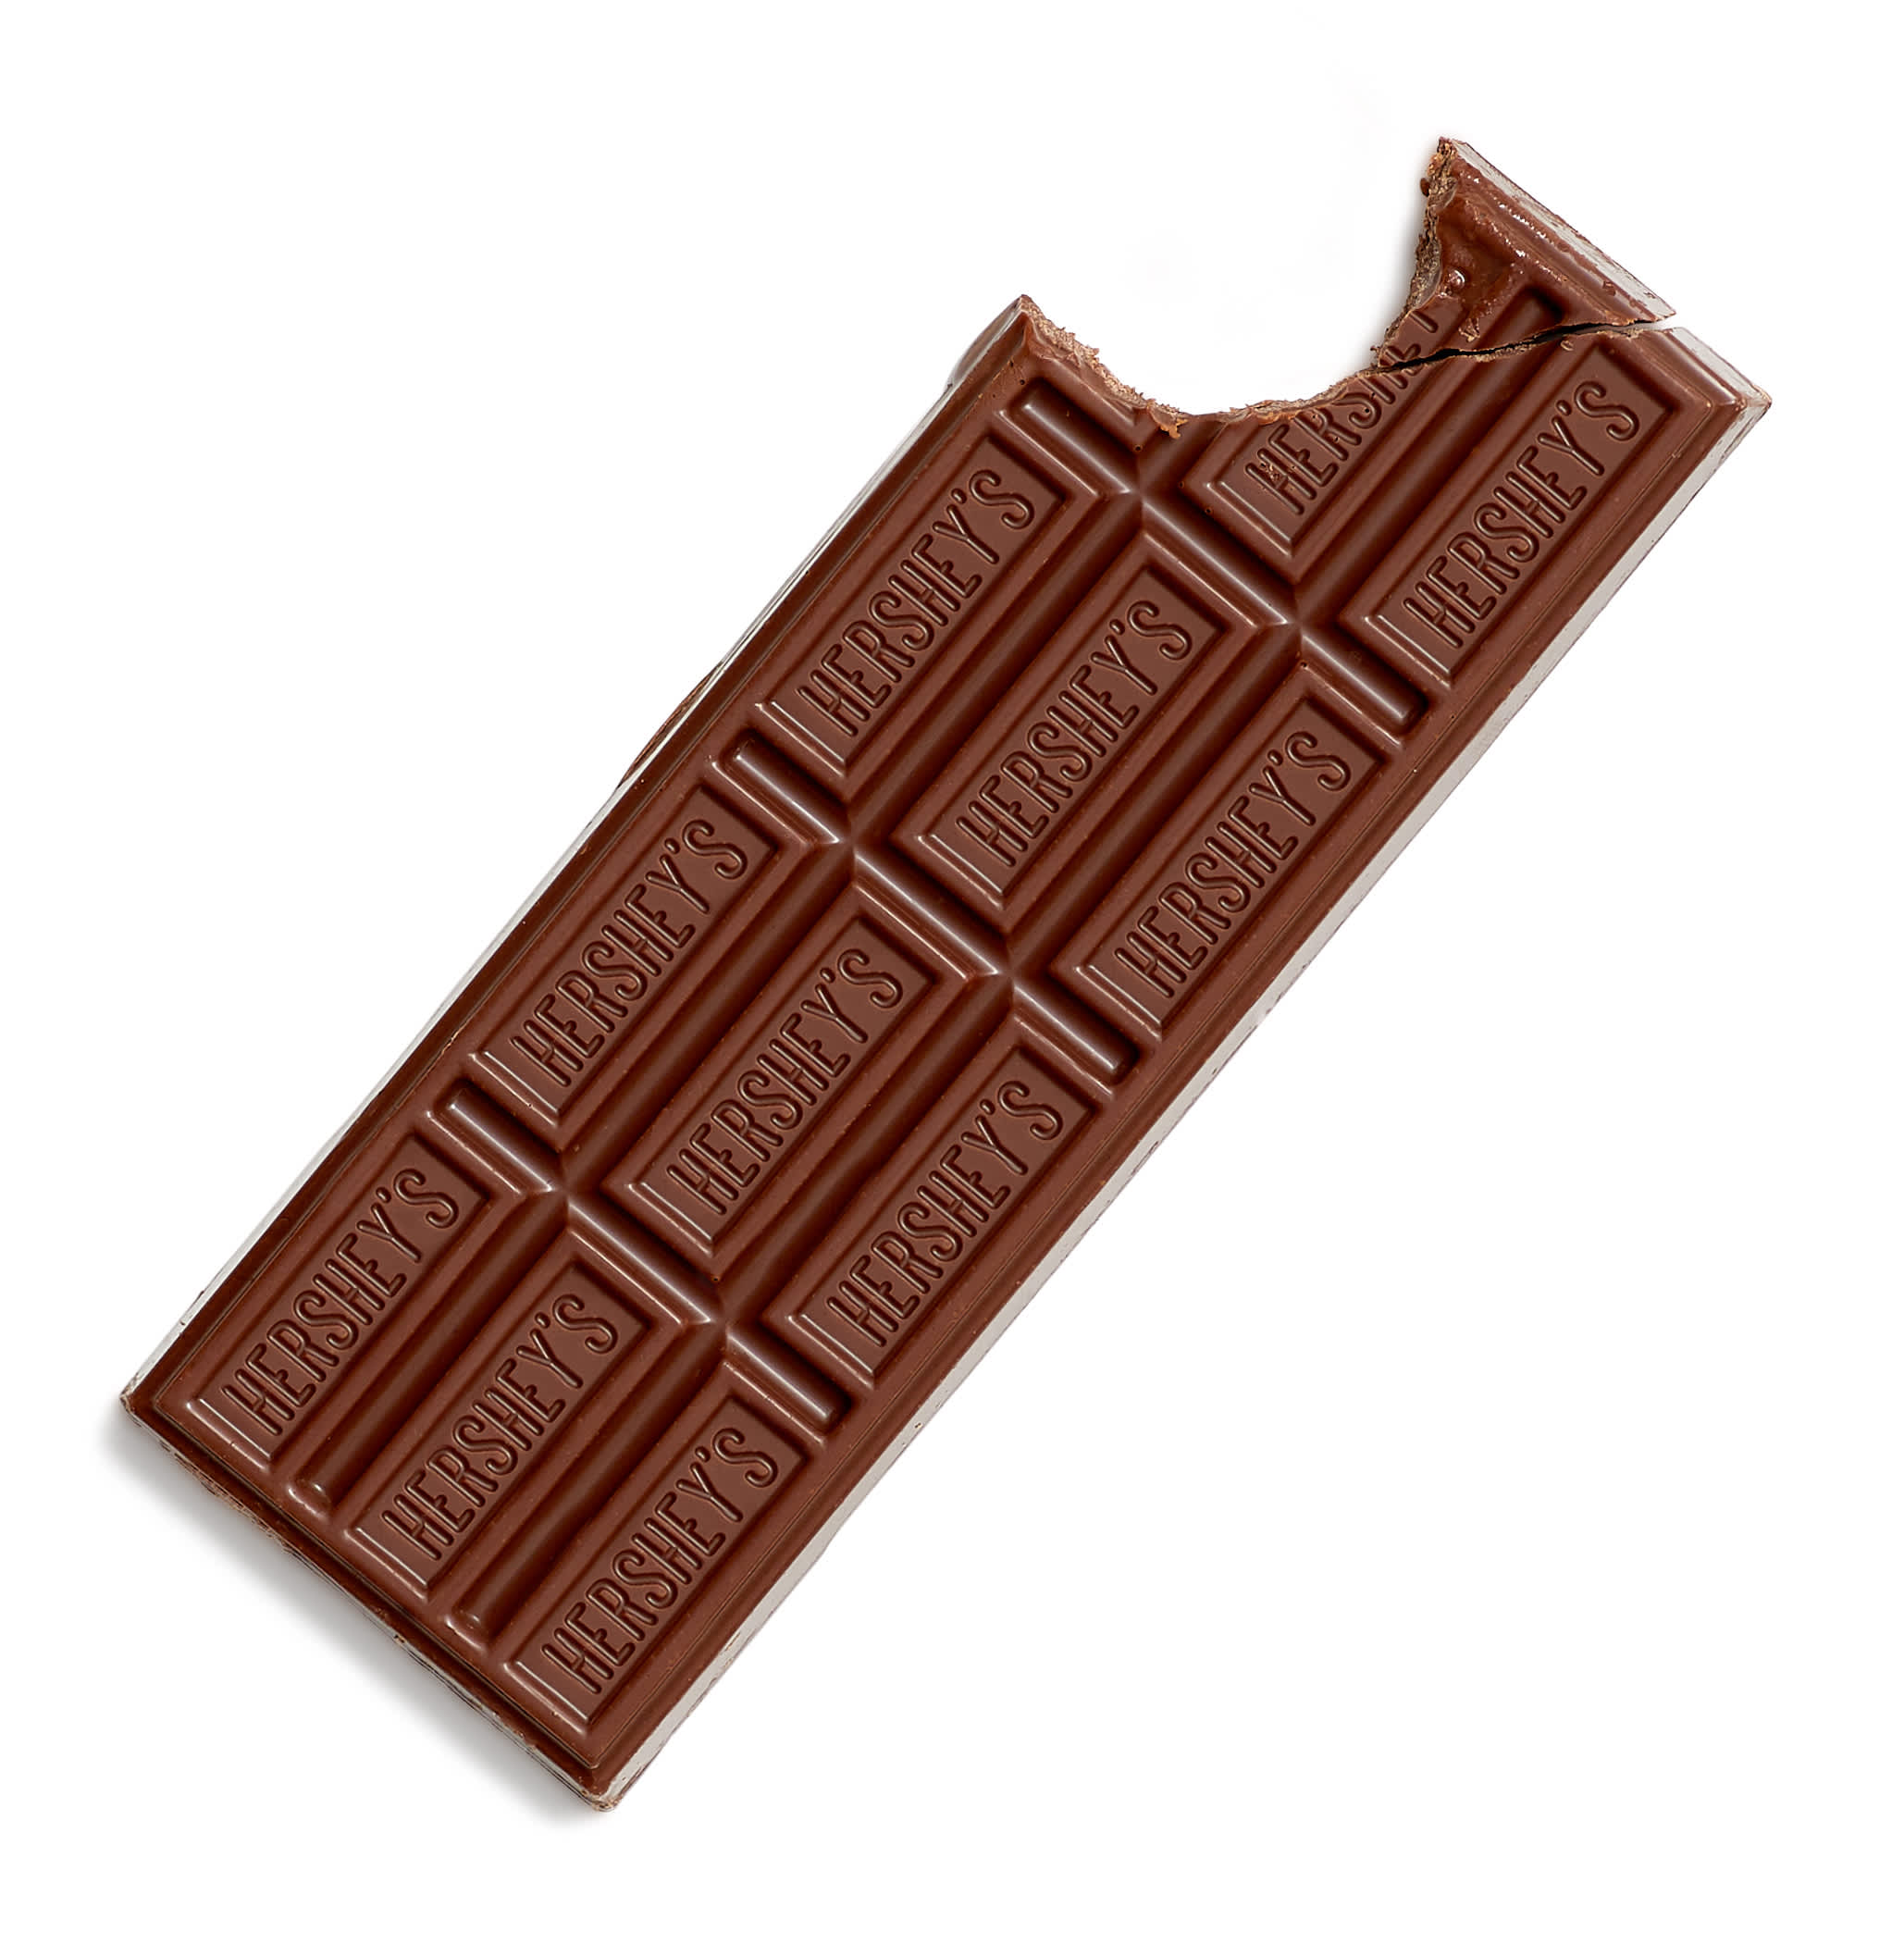 A Hershey chocolate bar with a bite taken out